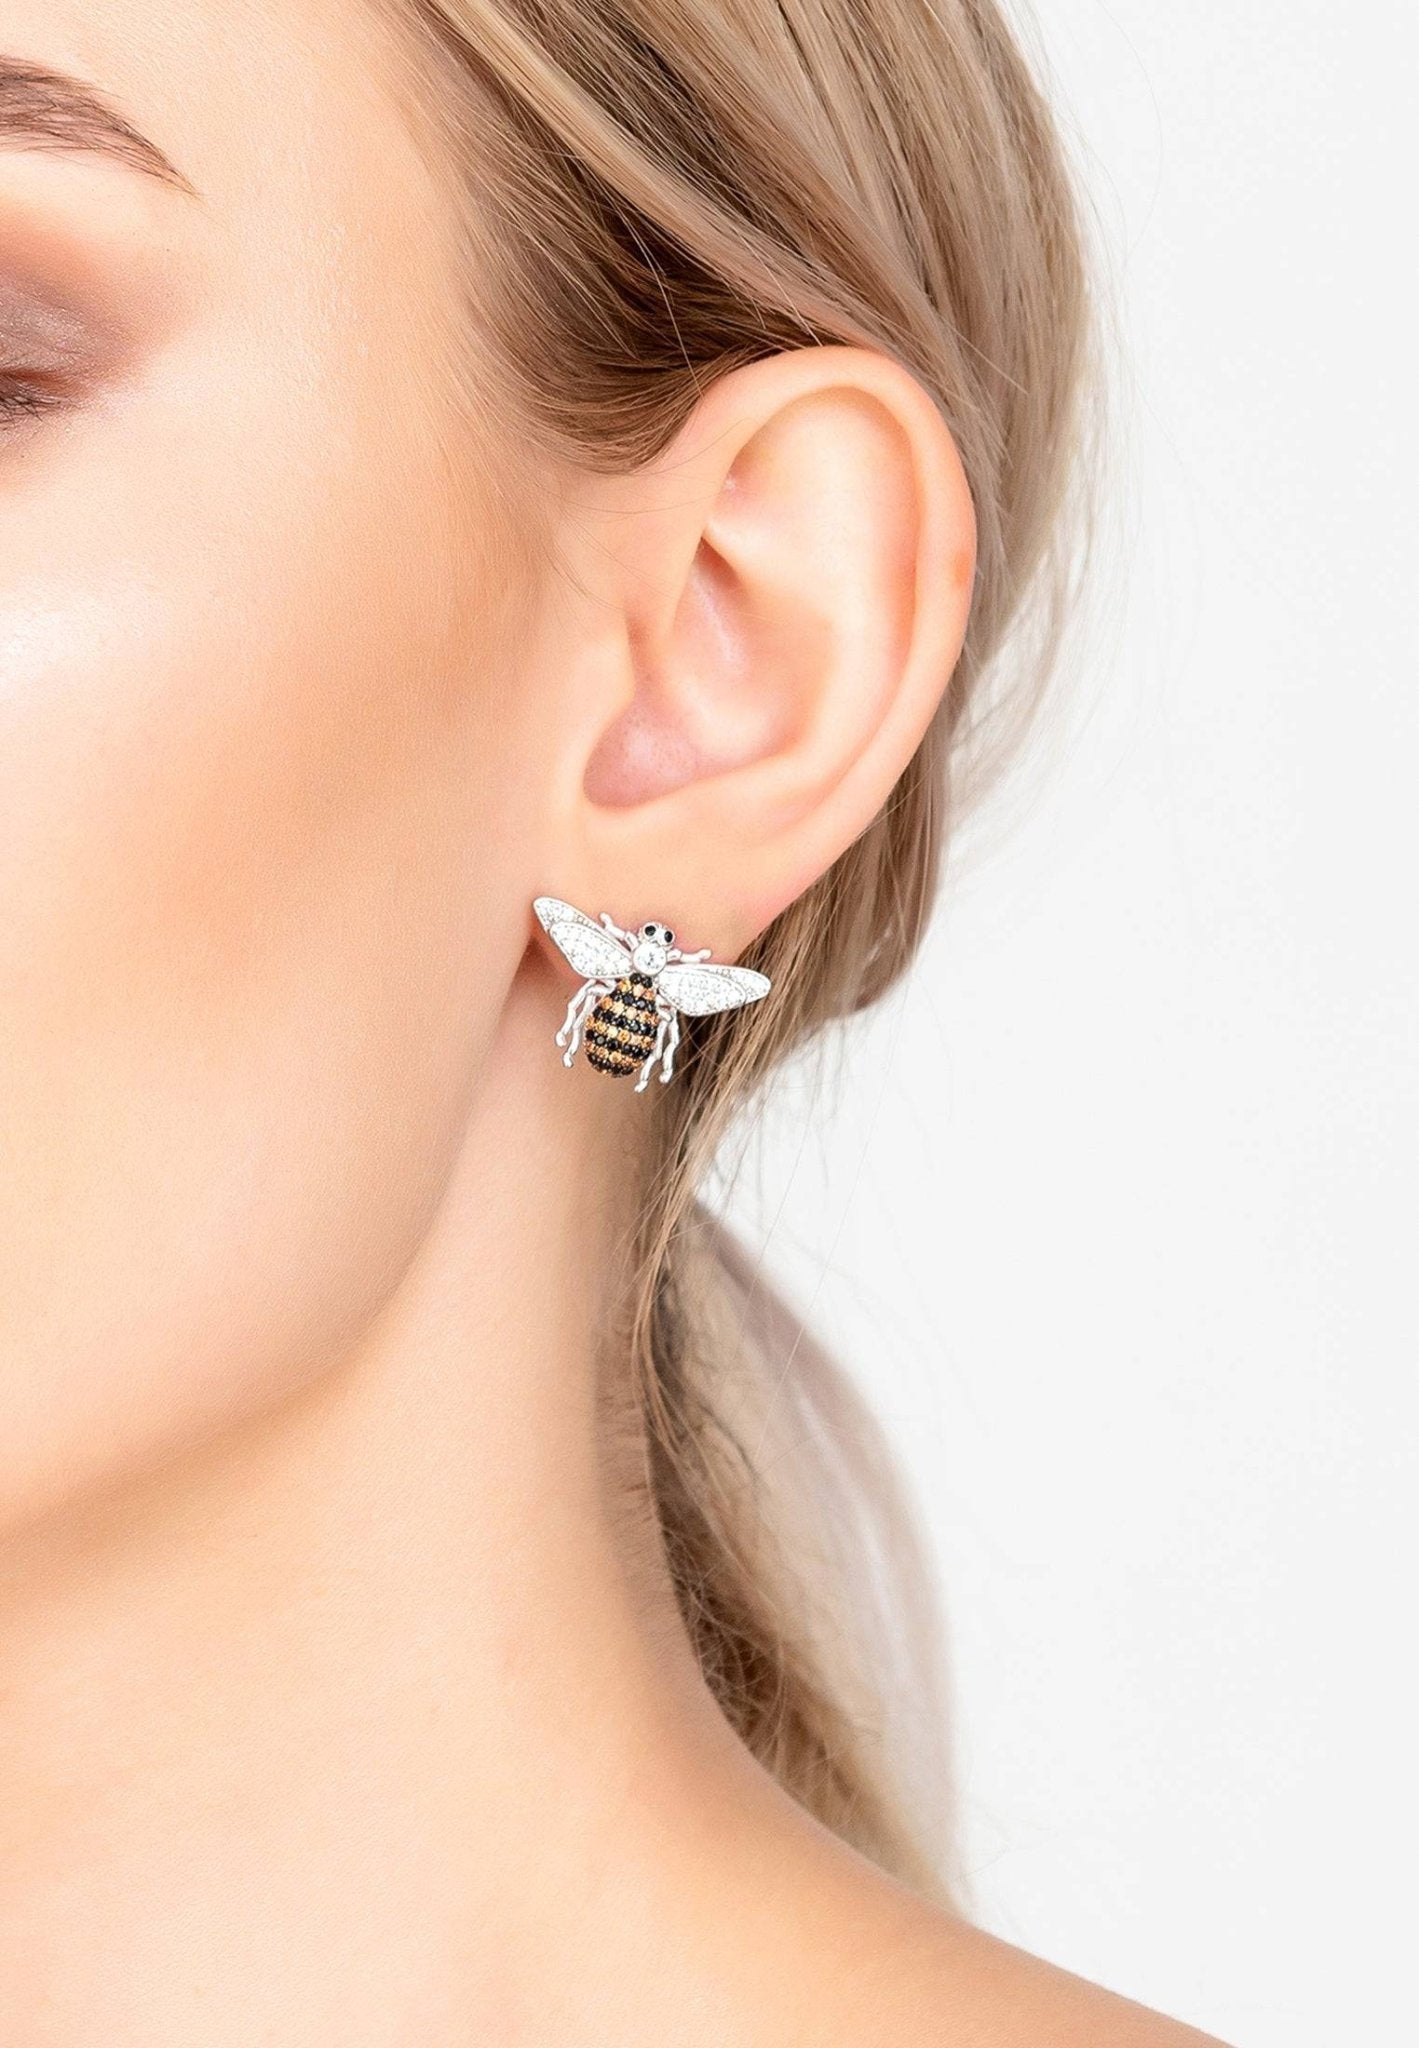 Honey Bee Stud Earrings Silver - Sparkly, Meaningful, Must-have for Animal Lovers! - Desire & Hope